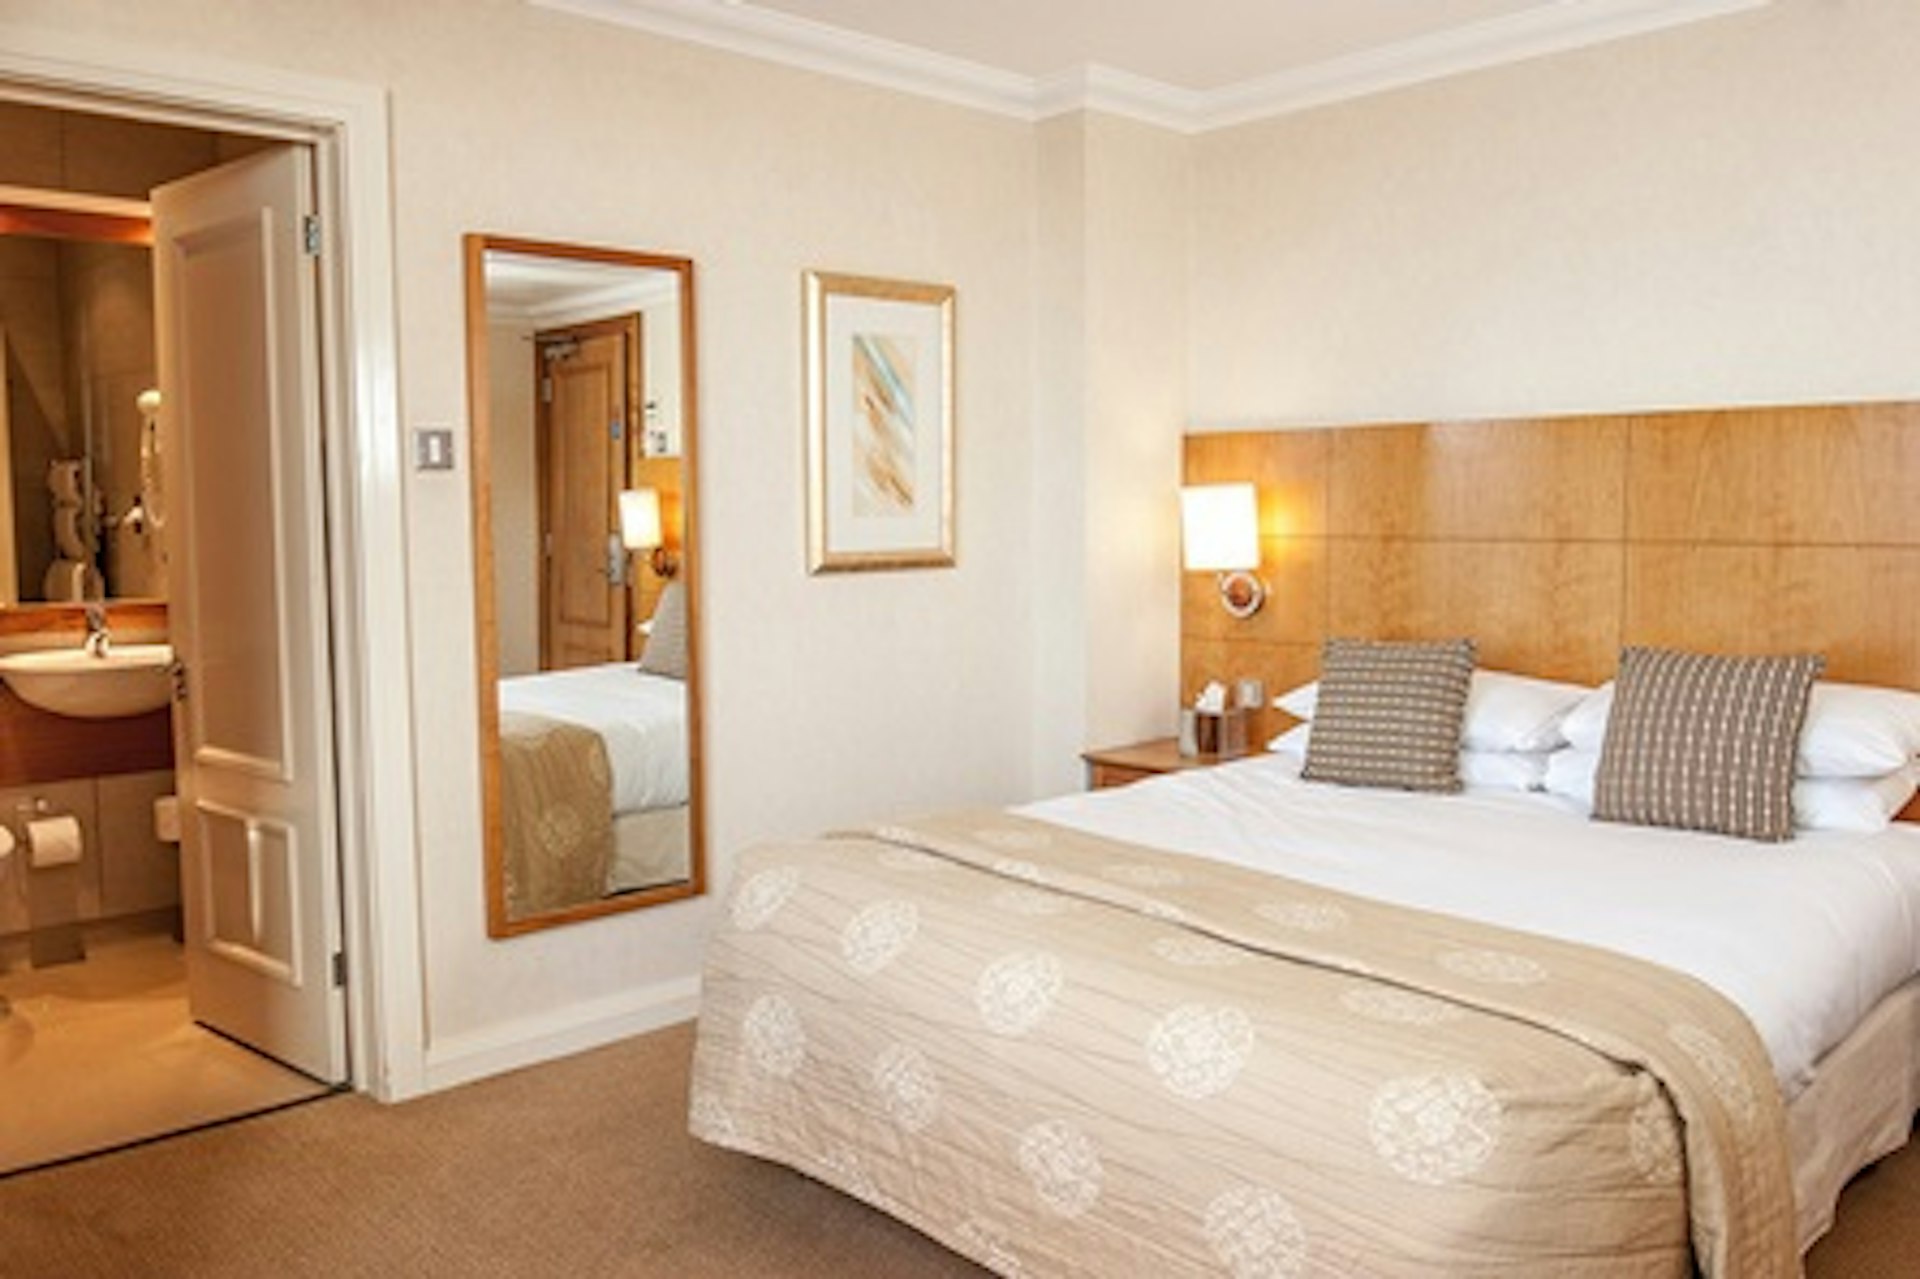 One Night Coastal Break for Two at the 4* Harbour Heights Hotel, Poole 2